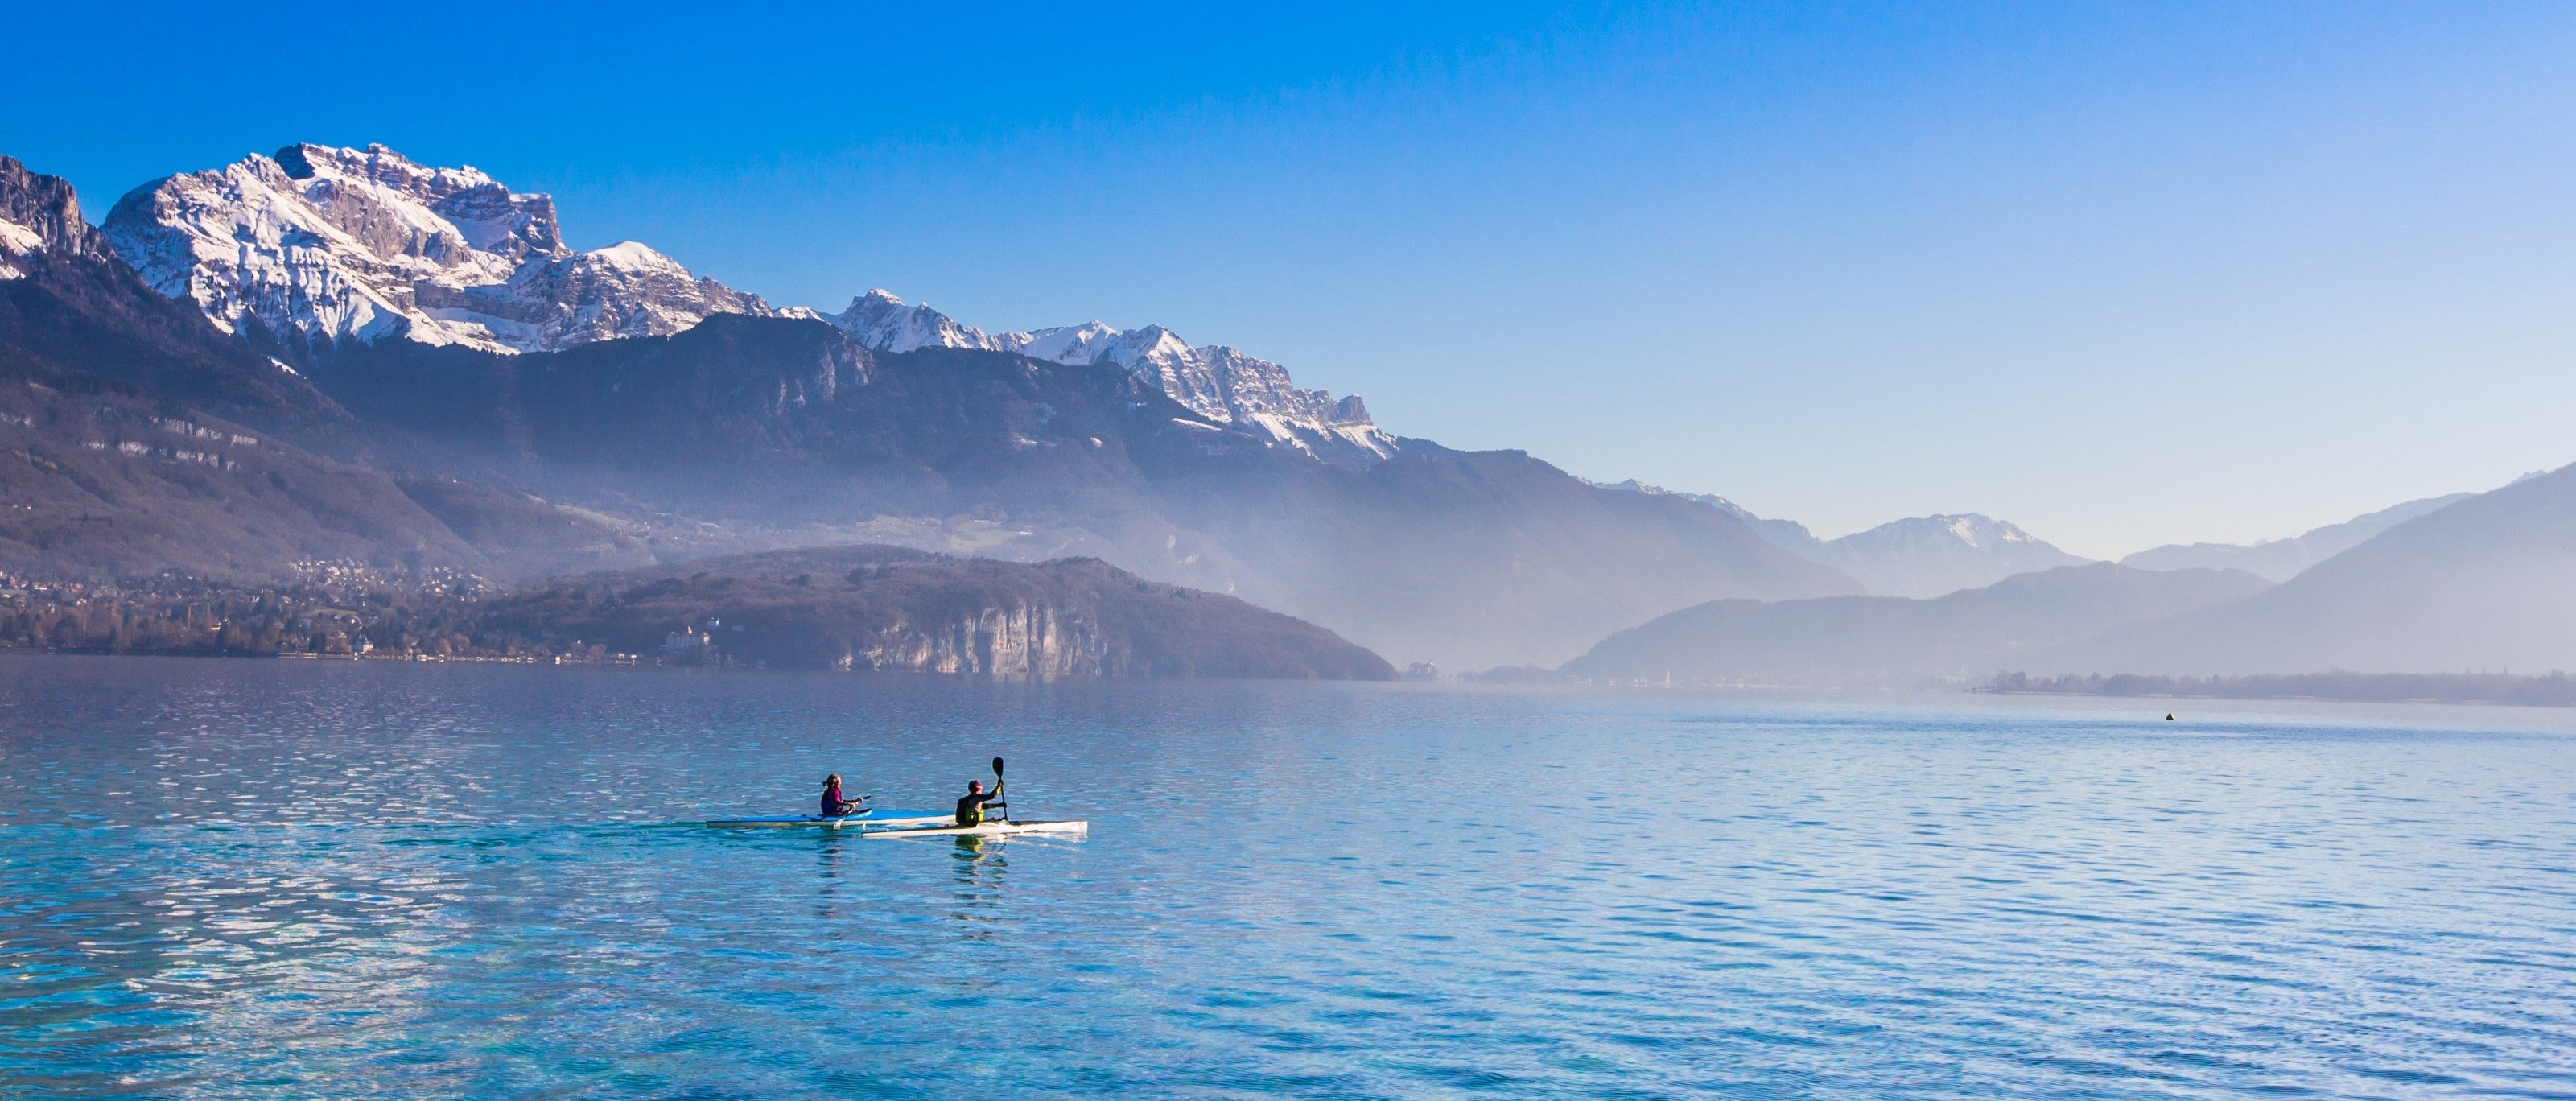 Field Guide: Annecy, France